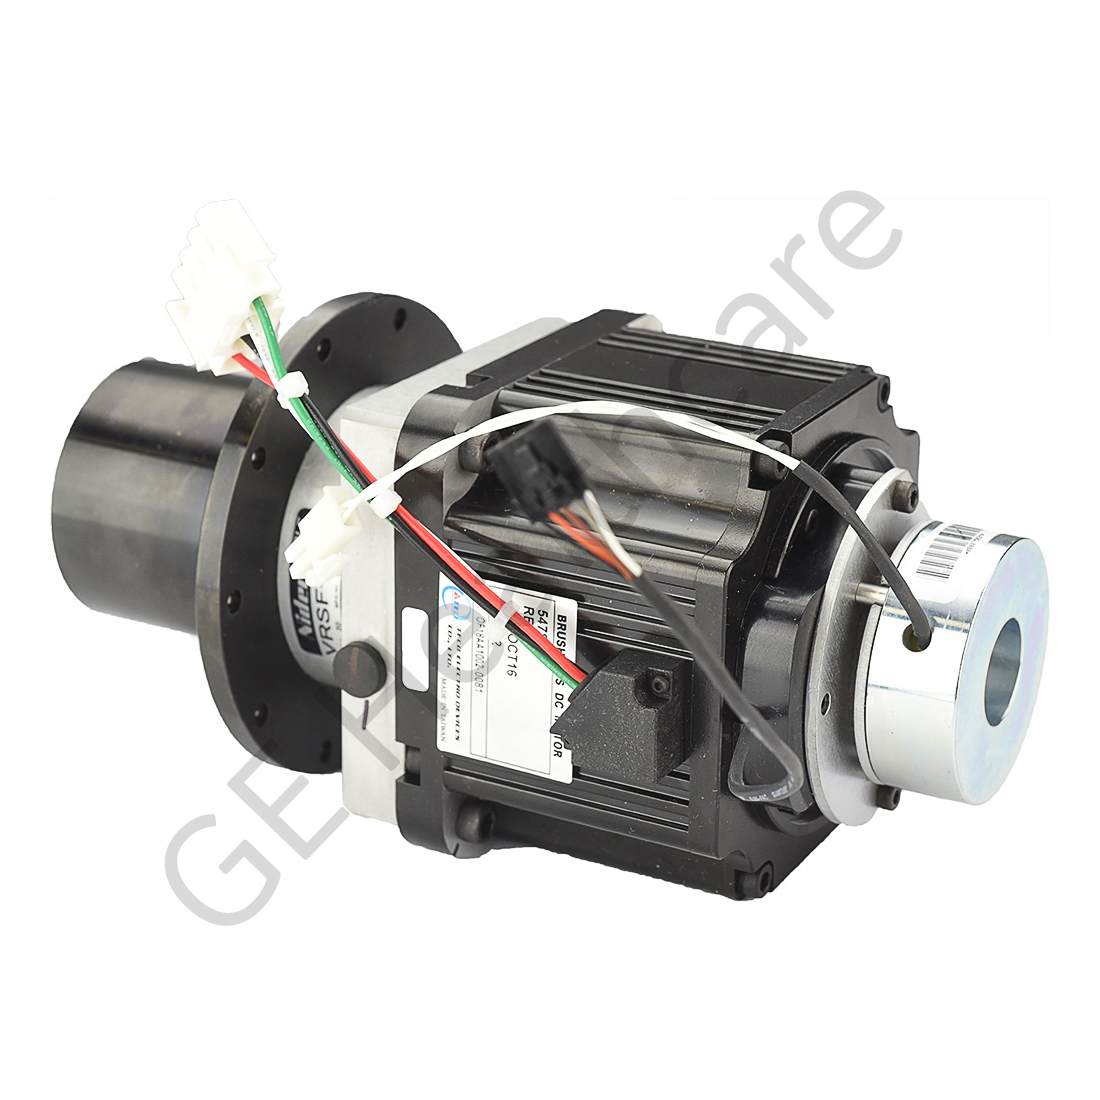 Motor Reducer Assembly with Brake 5479352